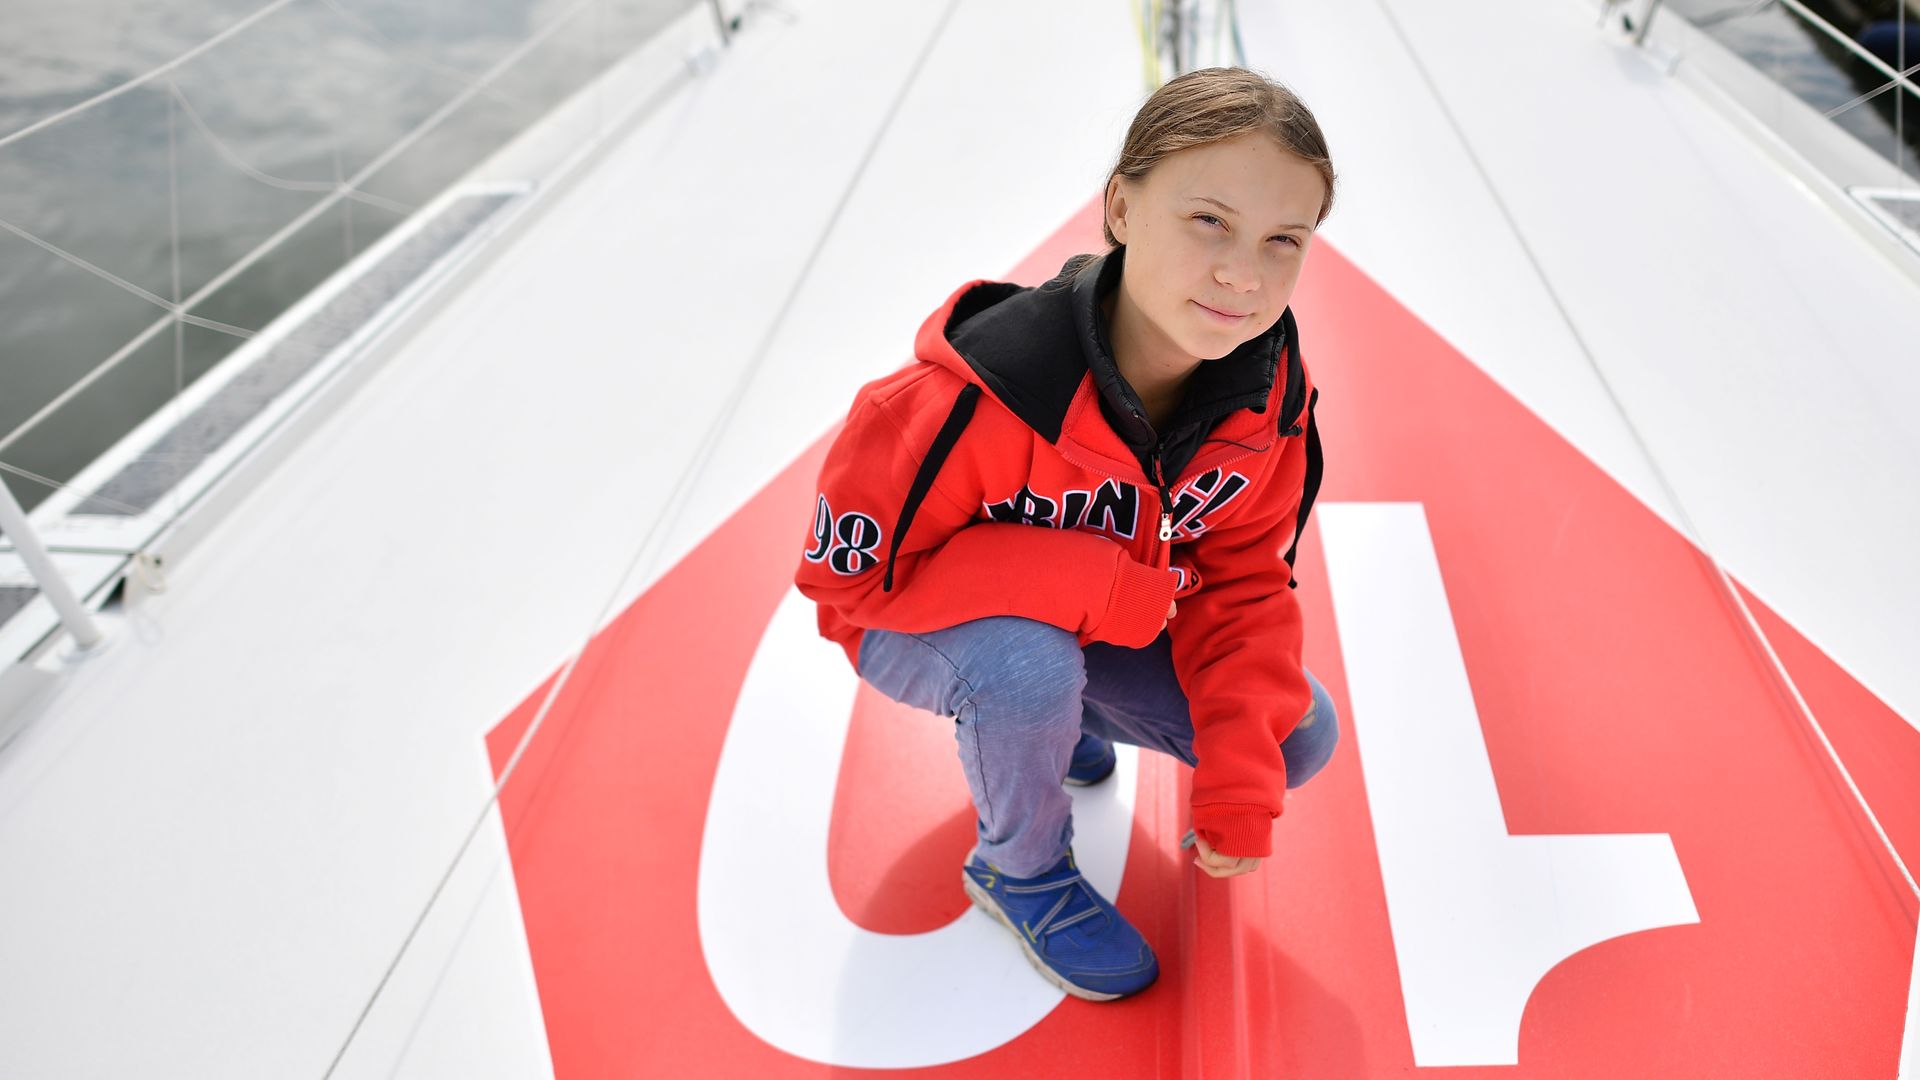 Swedish climate activist Greta Thunberg poses for a photograph during an inteview with AFP onboard the Malizia II sailing yacht at the Mayflower Marina in Plymouth, southwest England, on August 13